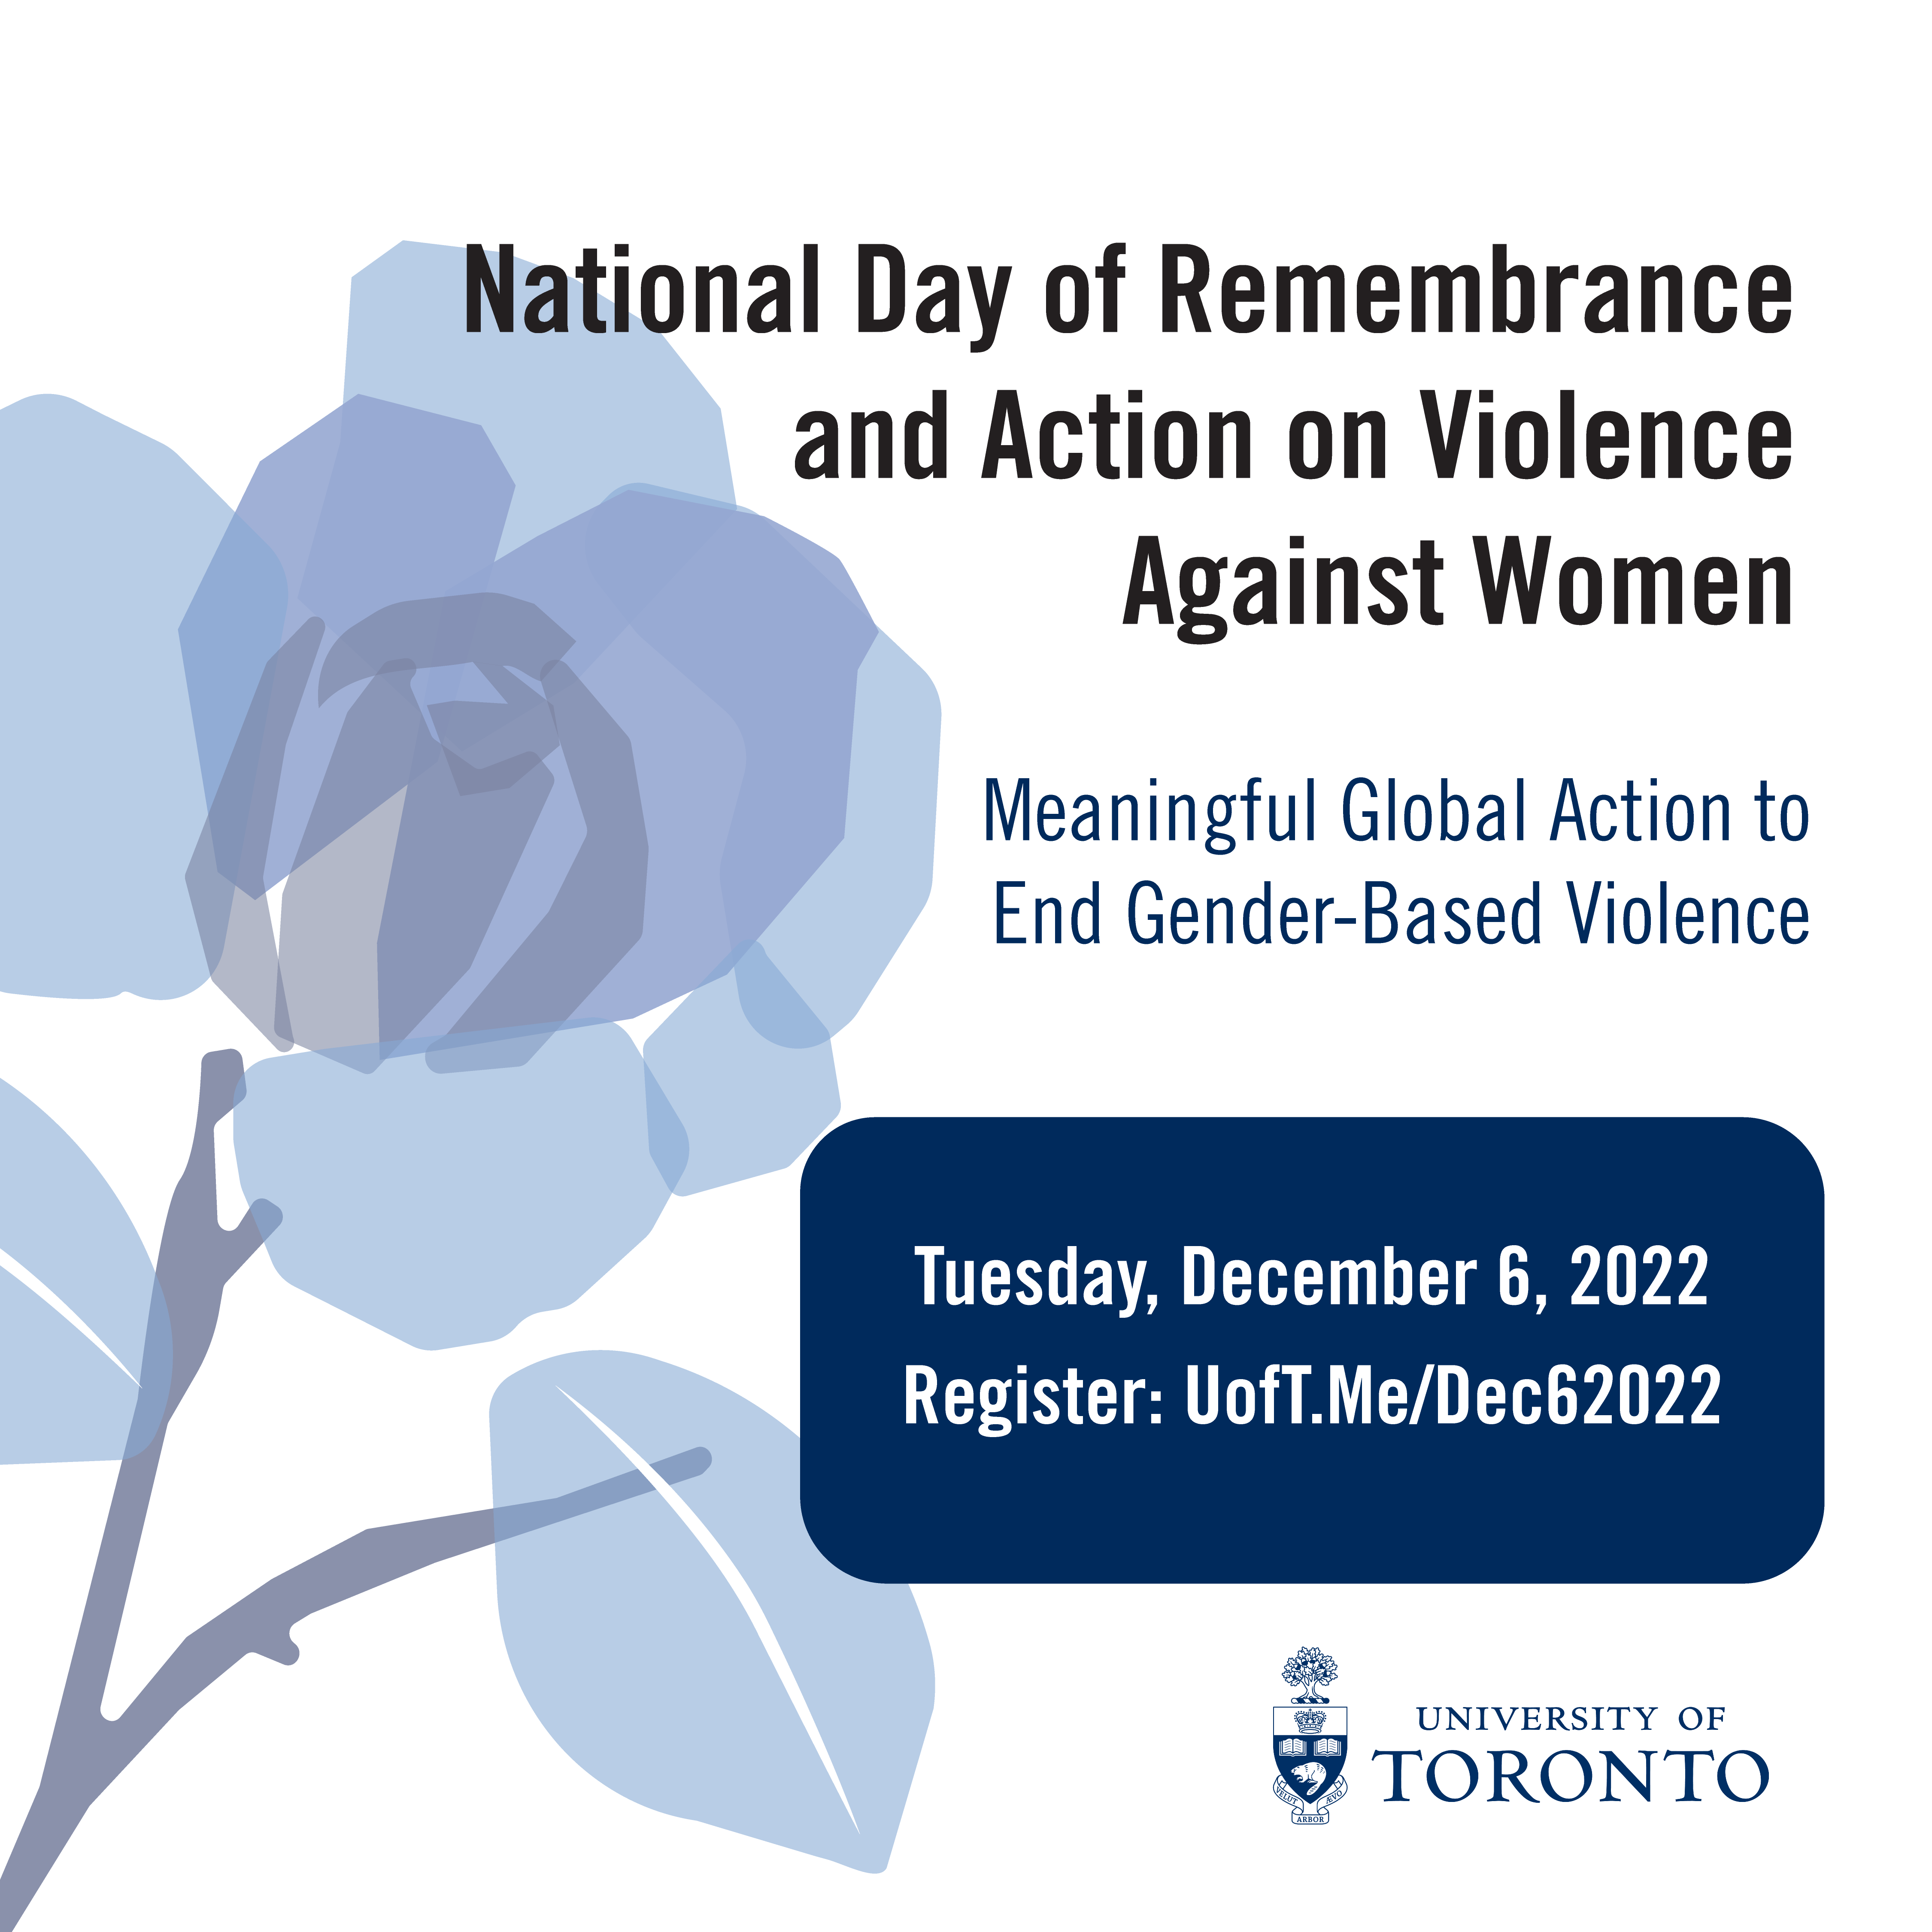 Image of blue rose against white background. Text that says "National Day of Remembrance and Action on Violence Against Women Meaningful Global Action to End Gender-Based Violence Tuesday, December 6, 2022 Register: UofT.Me/Dec62022 UNIVERSITY OF TORONTO logo